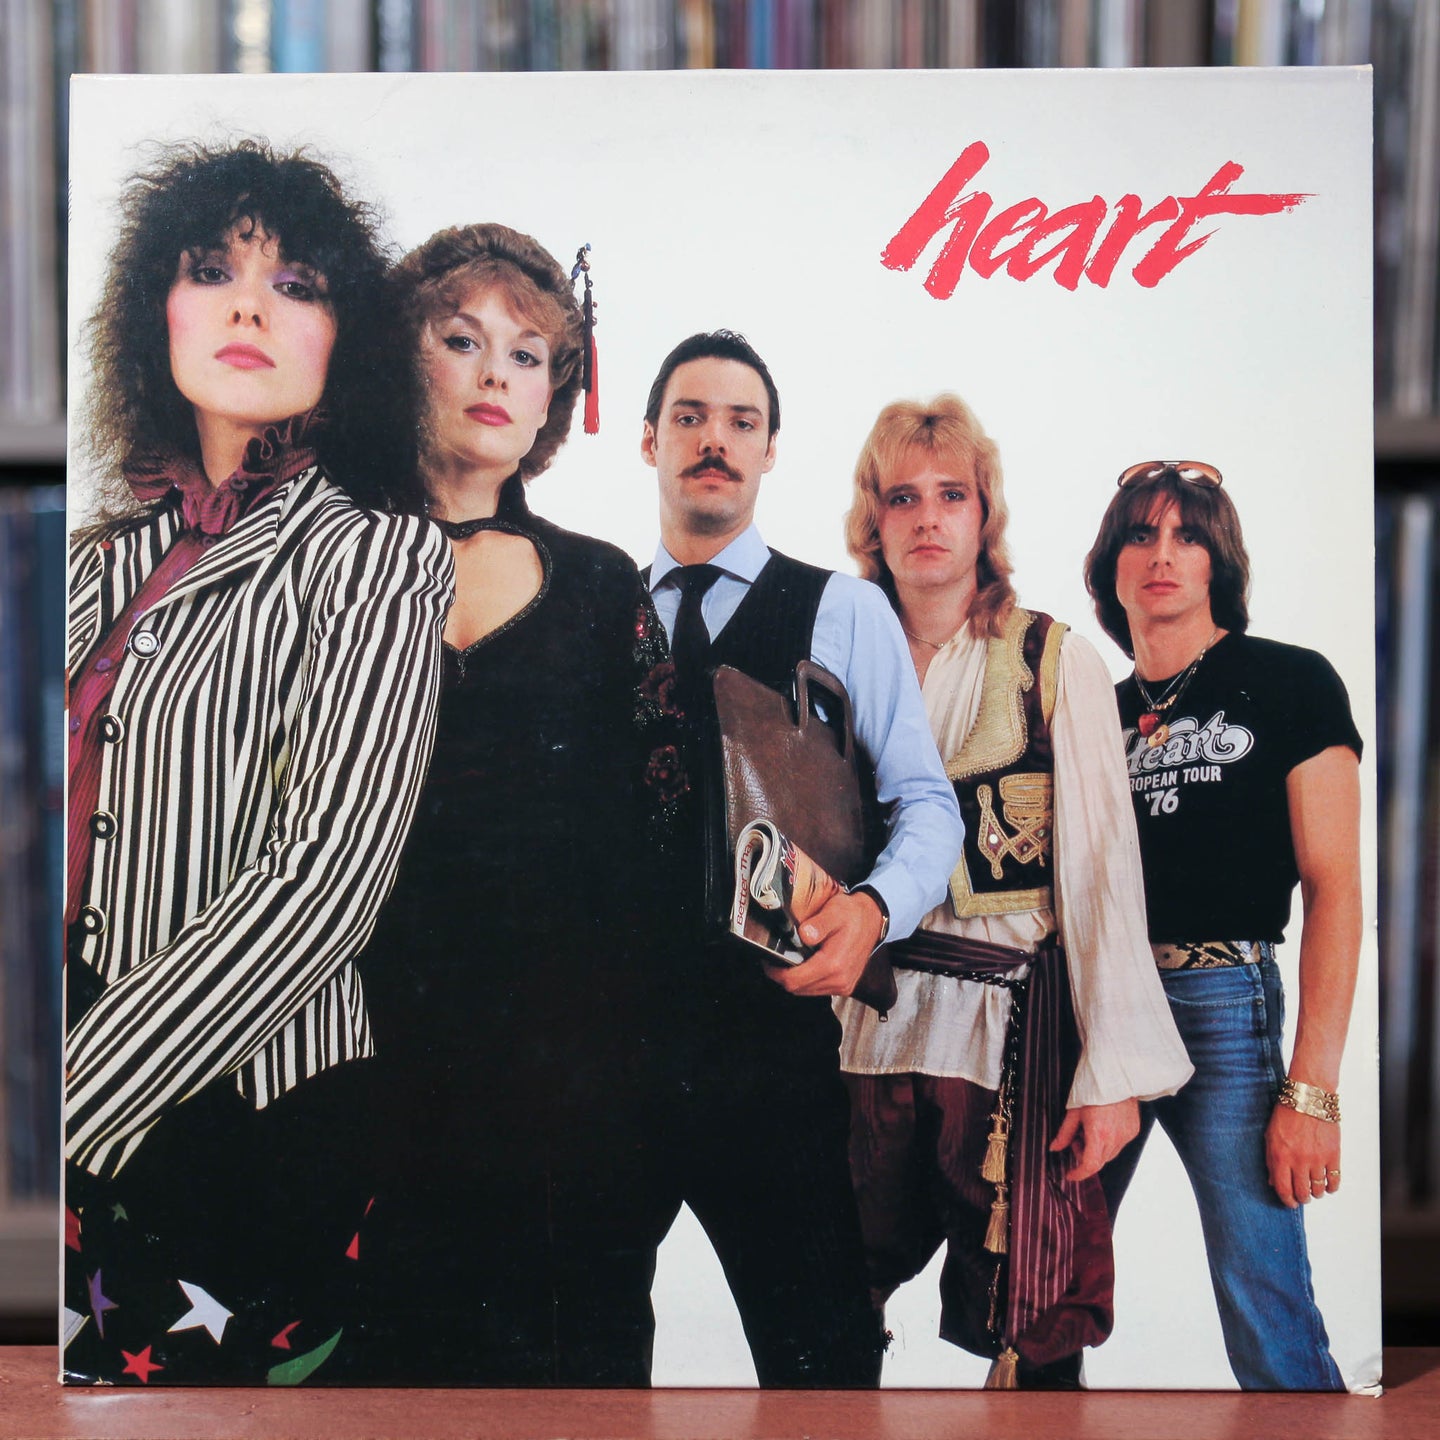 Heart - Greatest Hits / Live - 2LP - 1980 Epic, VG+/VG